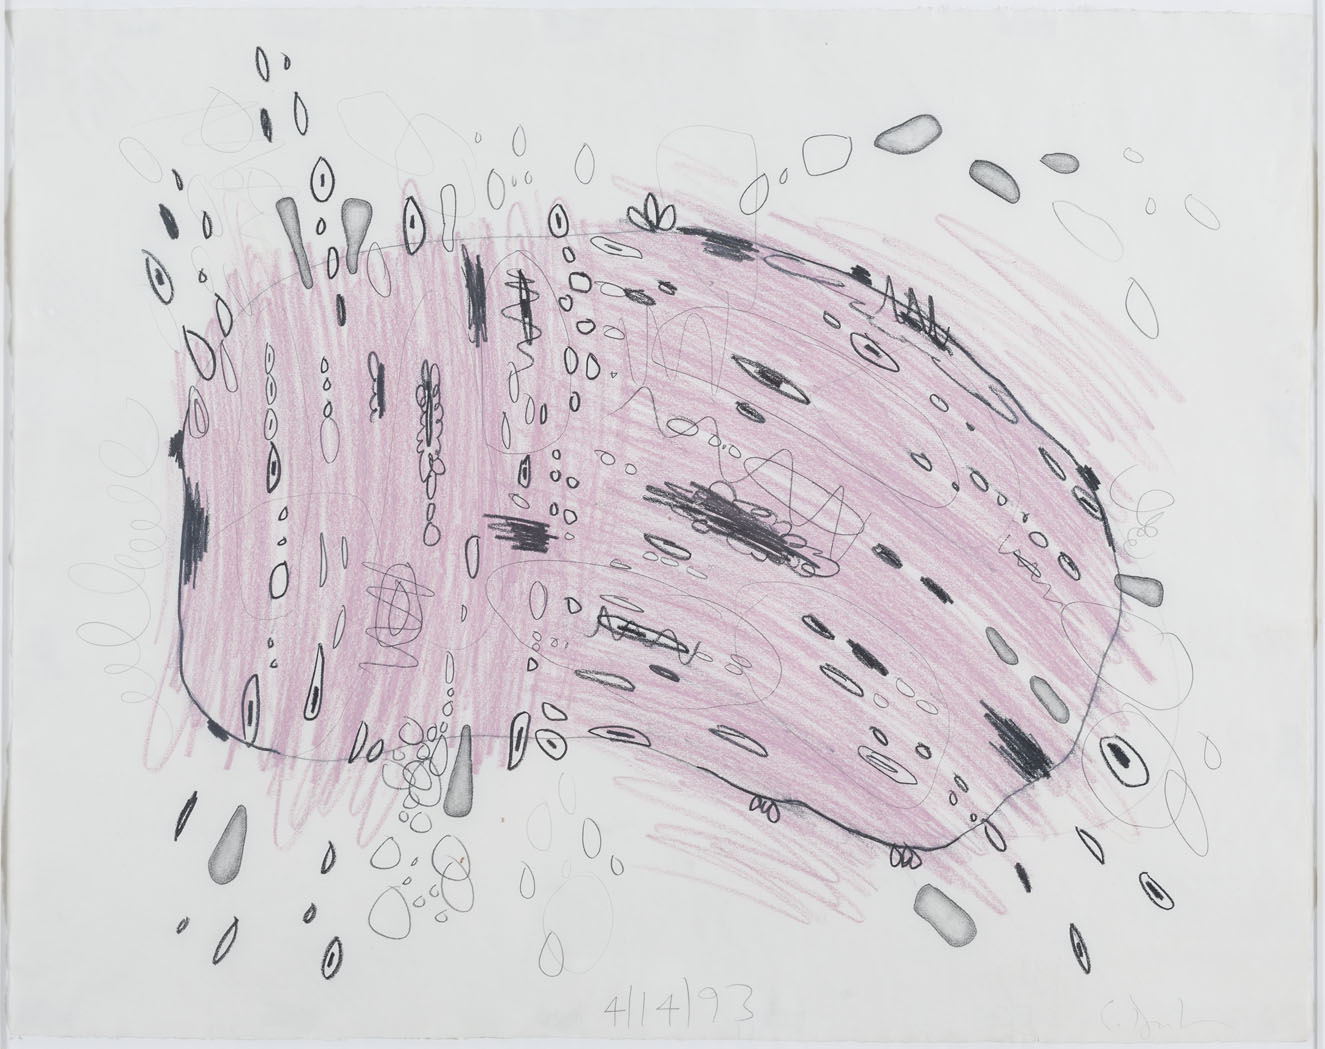 <i>Untitled (4/14/93)</i>, 1993, wax crayon, colored pencil, and pencil on paper,18 1/4 x 22 7/8 inches (46.4 x 58.1 cm)